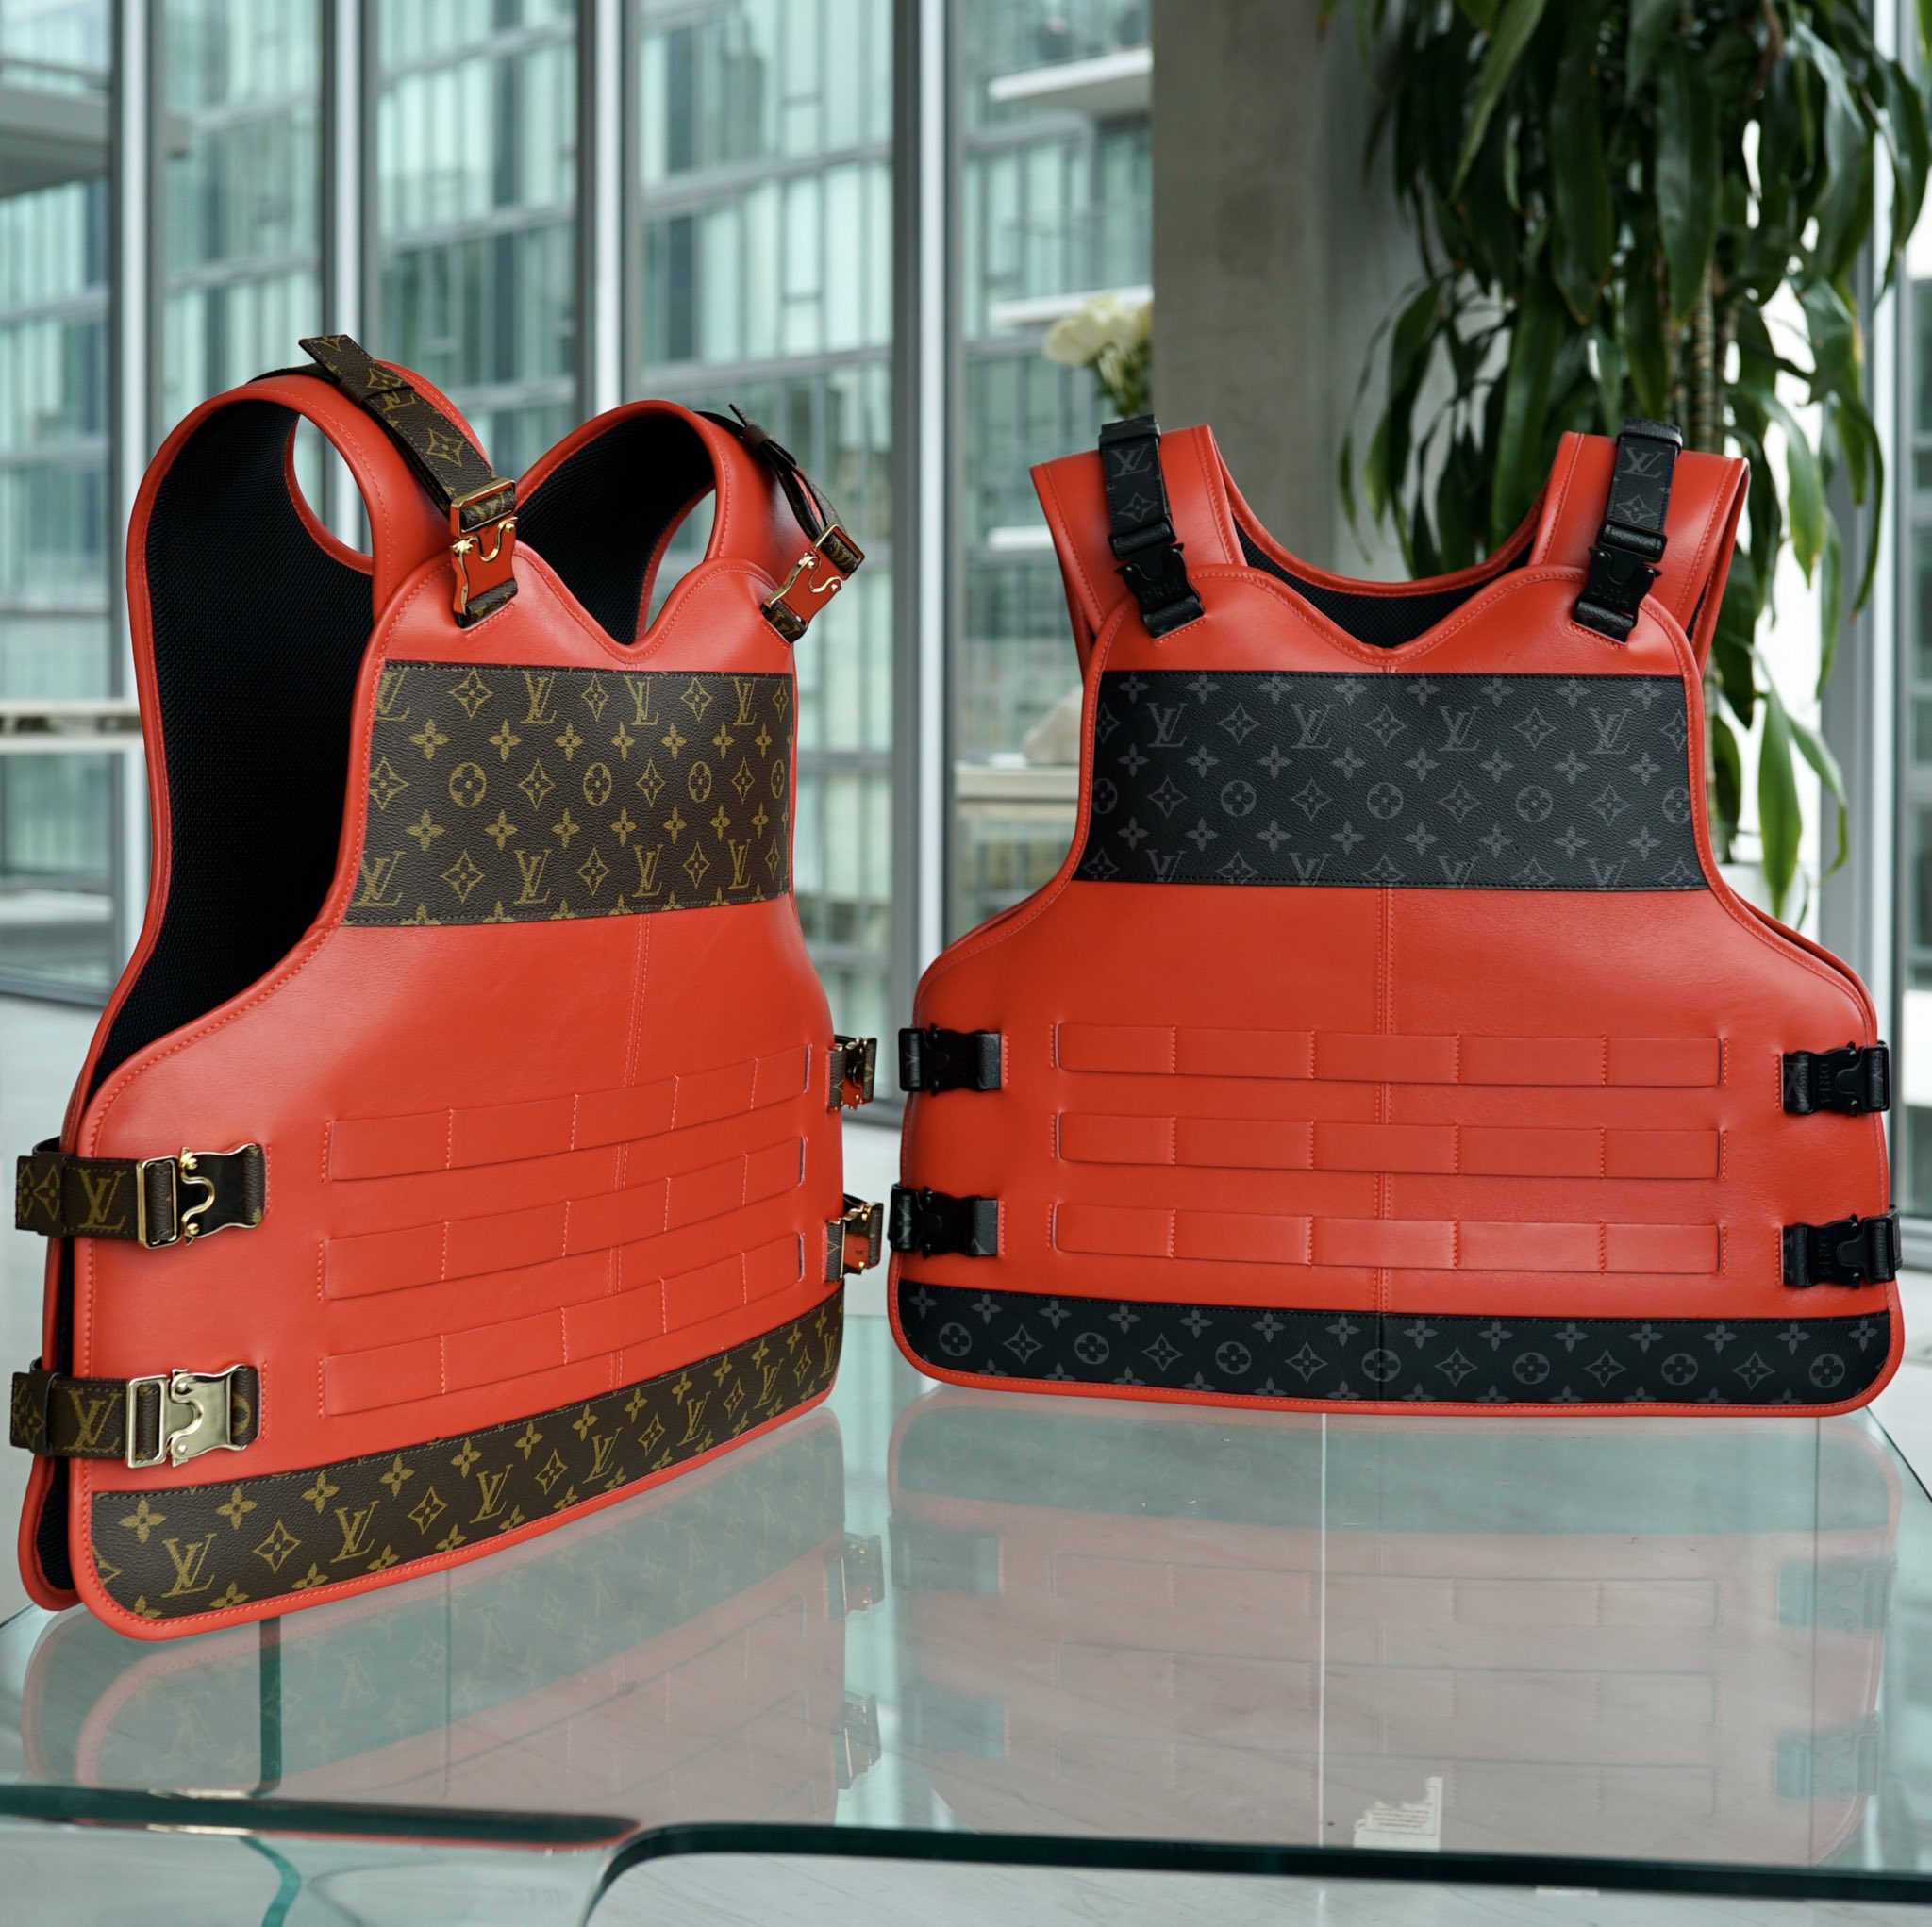 Sheron Barber on X: I Made two new vest. Which color is better? # LouisVuitton #trippieredd #50Cent  / X